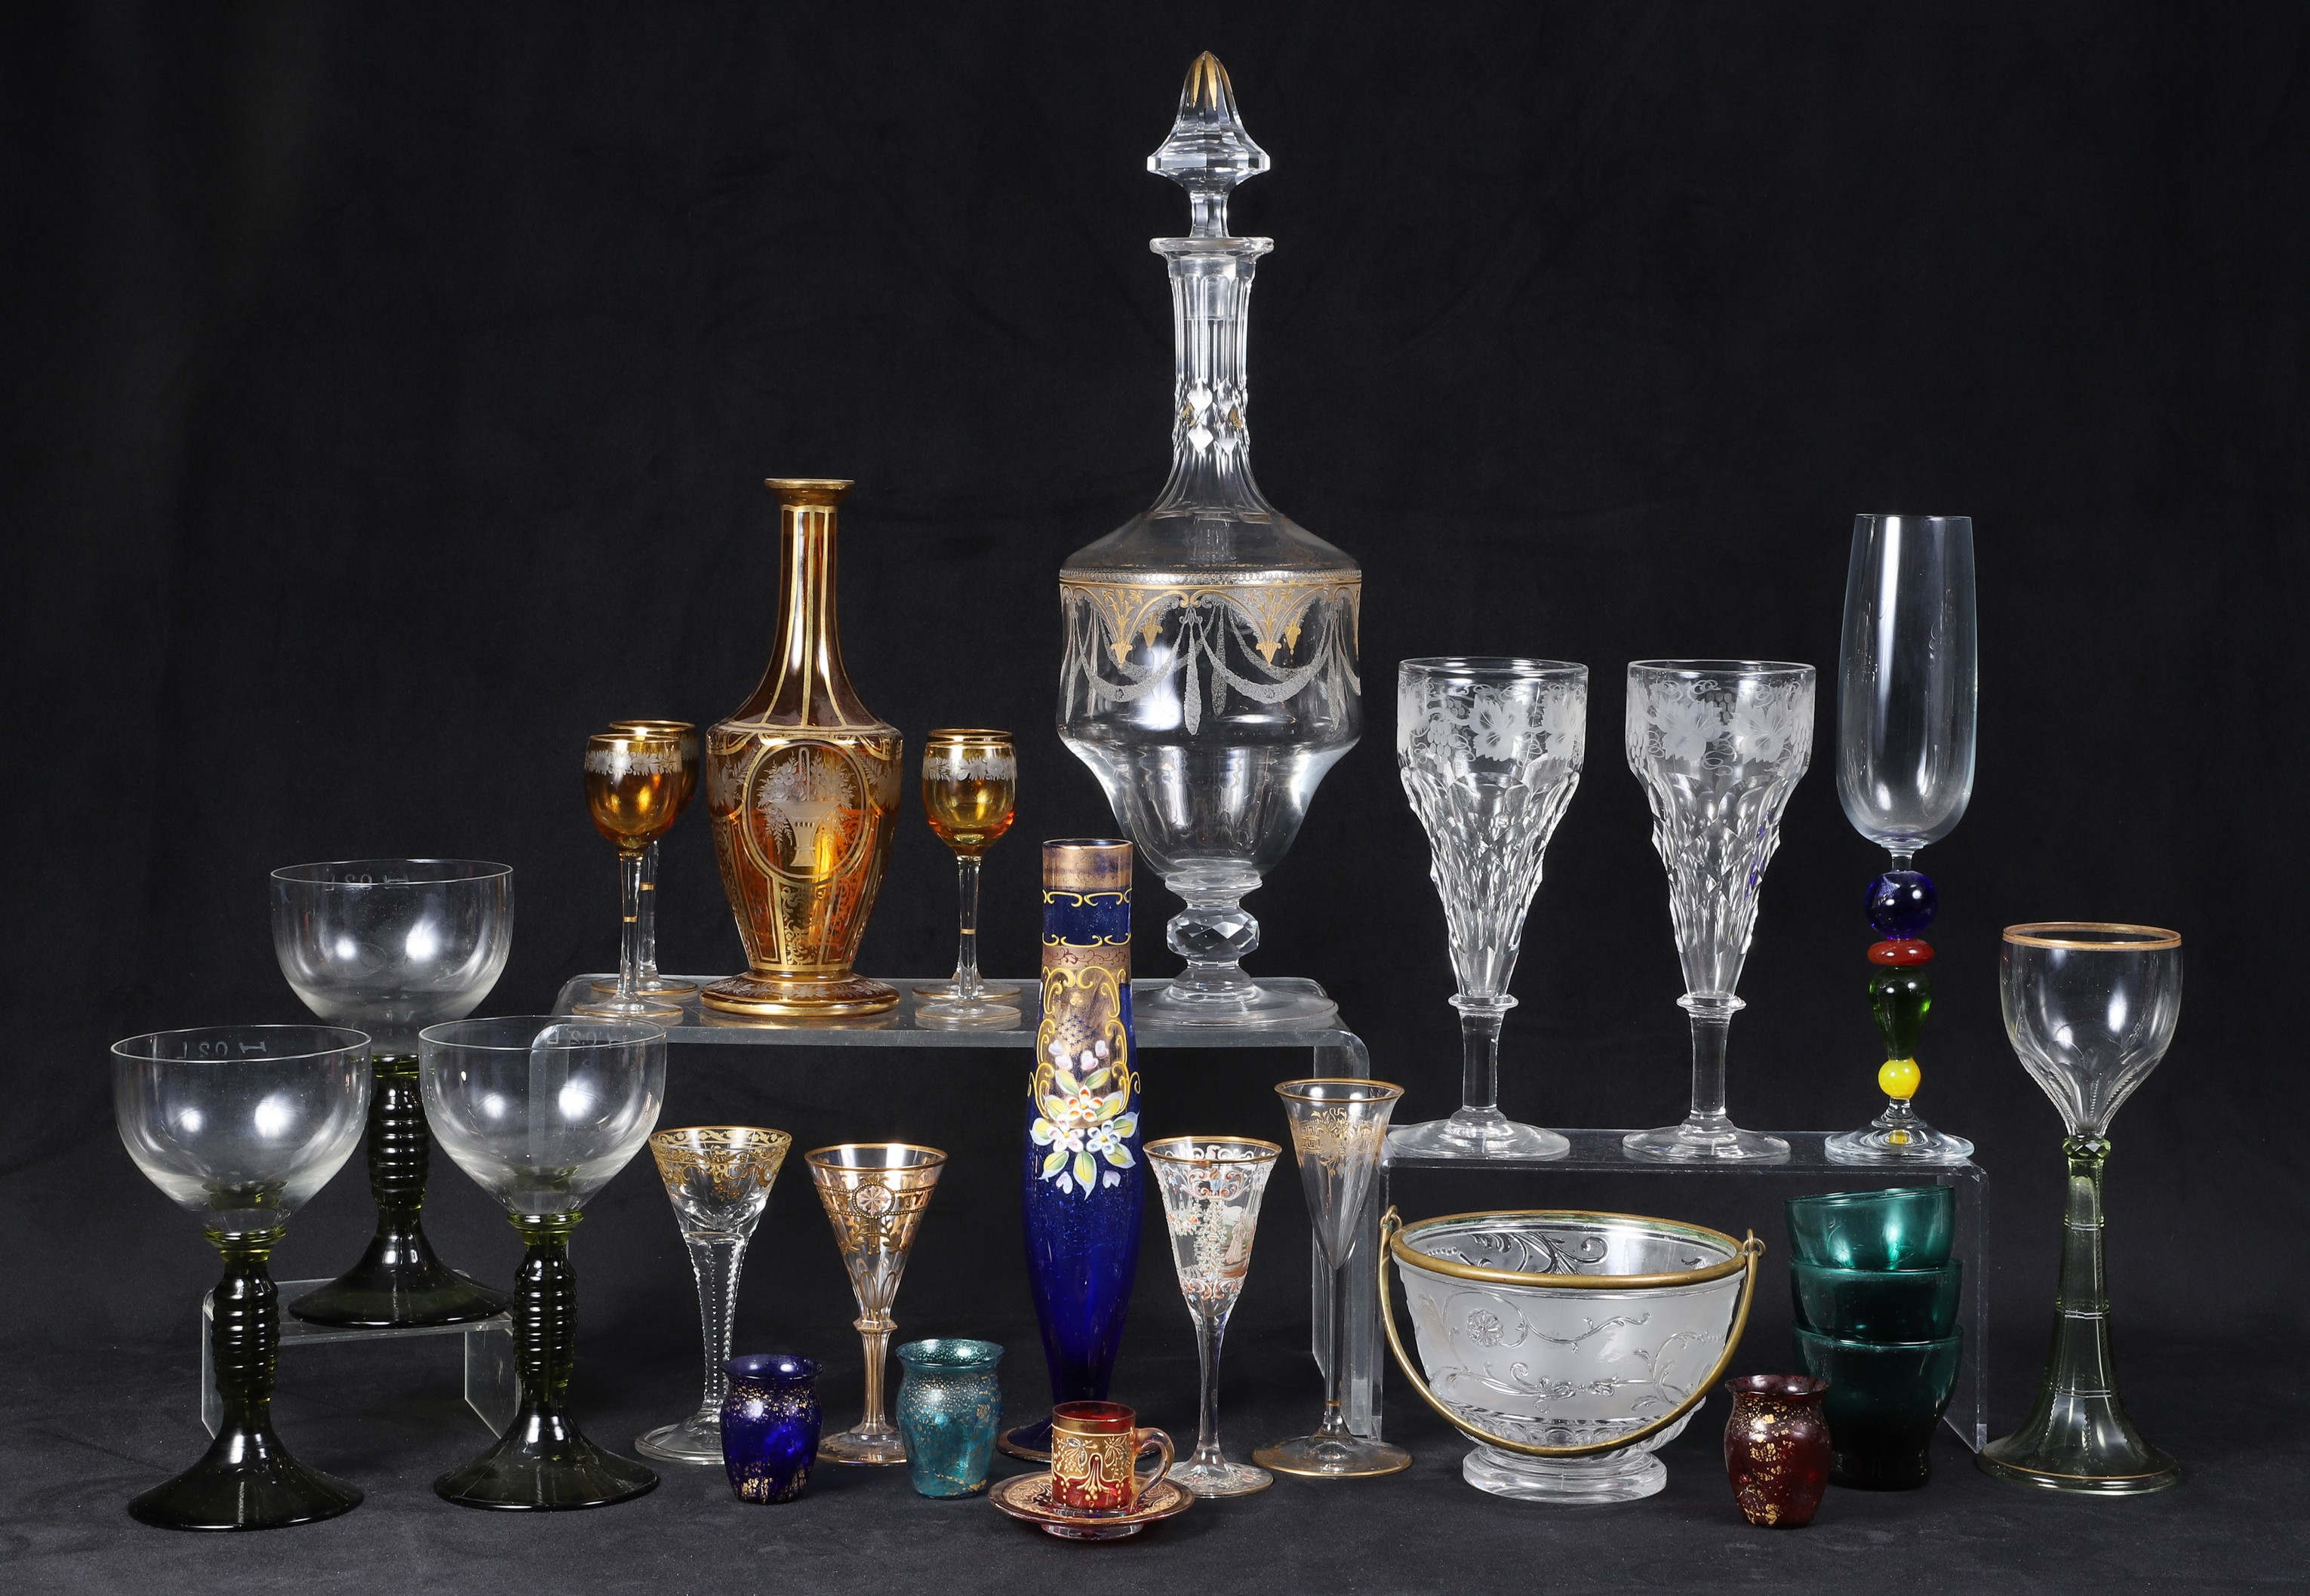 Glasses, decanters and vases to